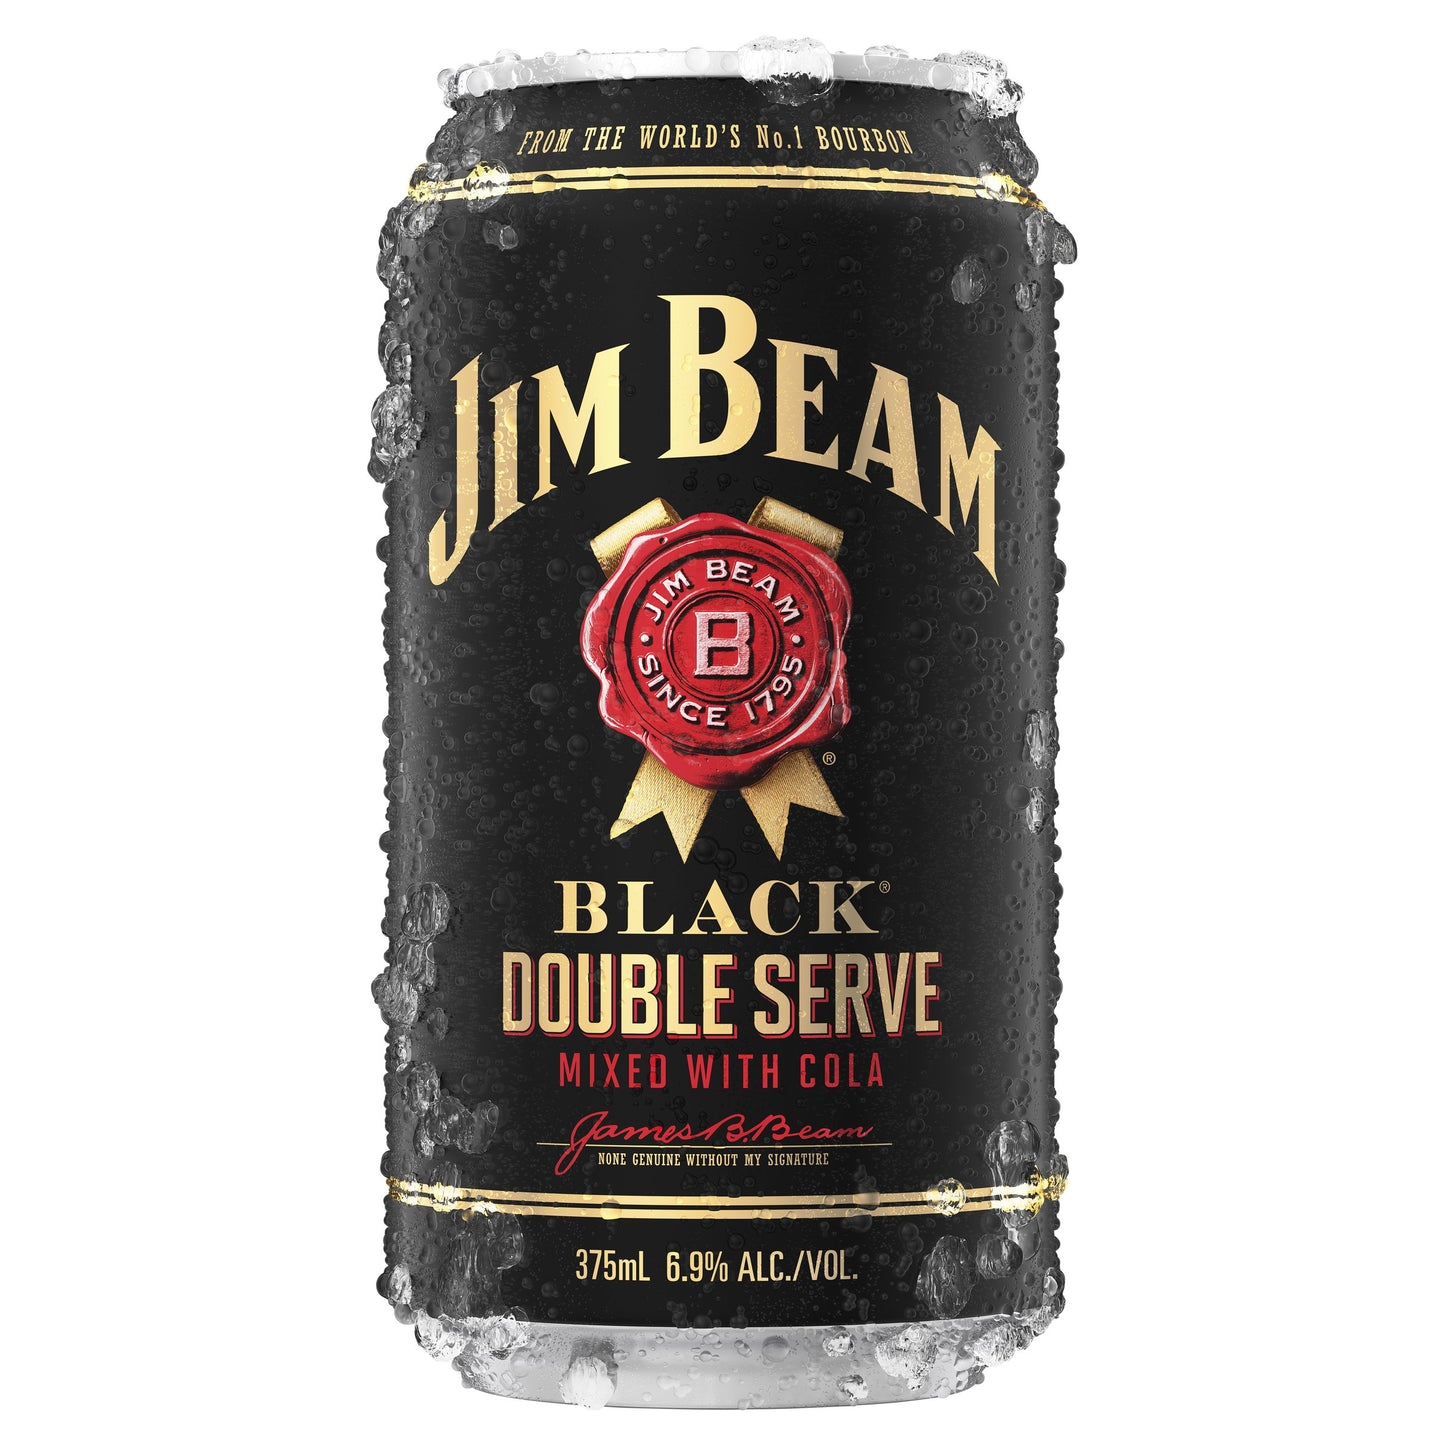 Jim Beam Black Double Serve & Cola cans - 4 pack